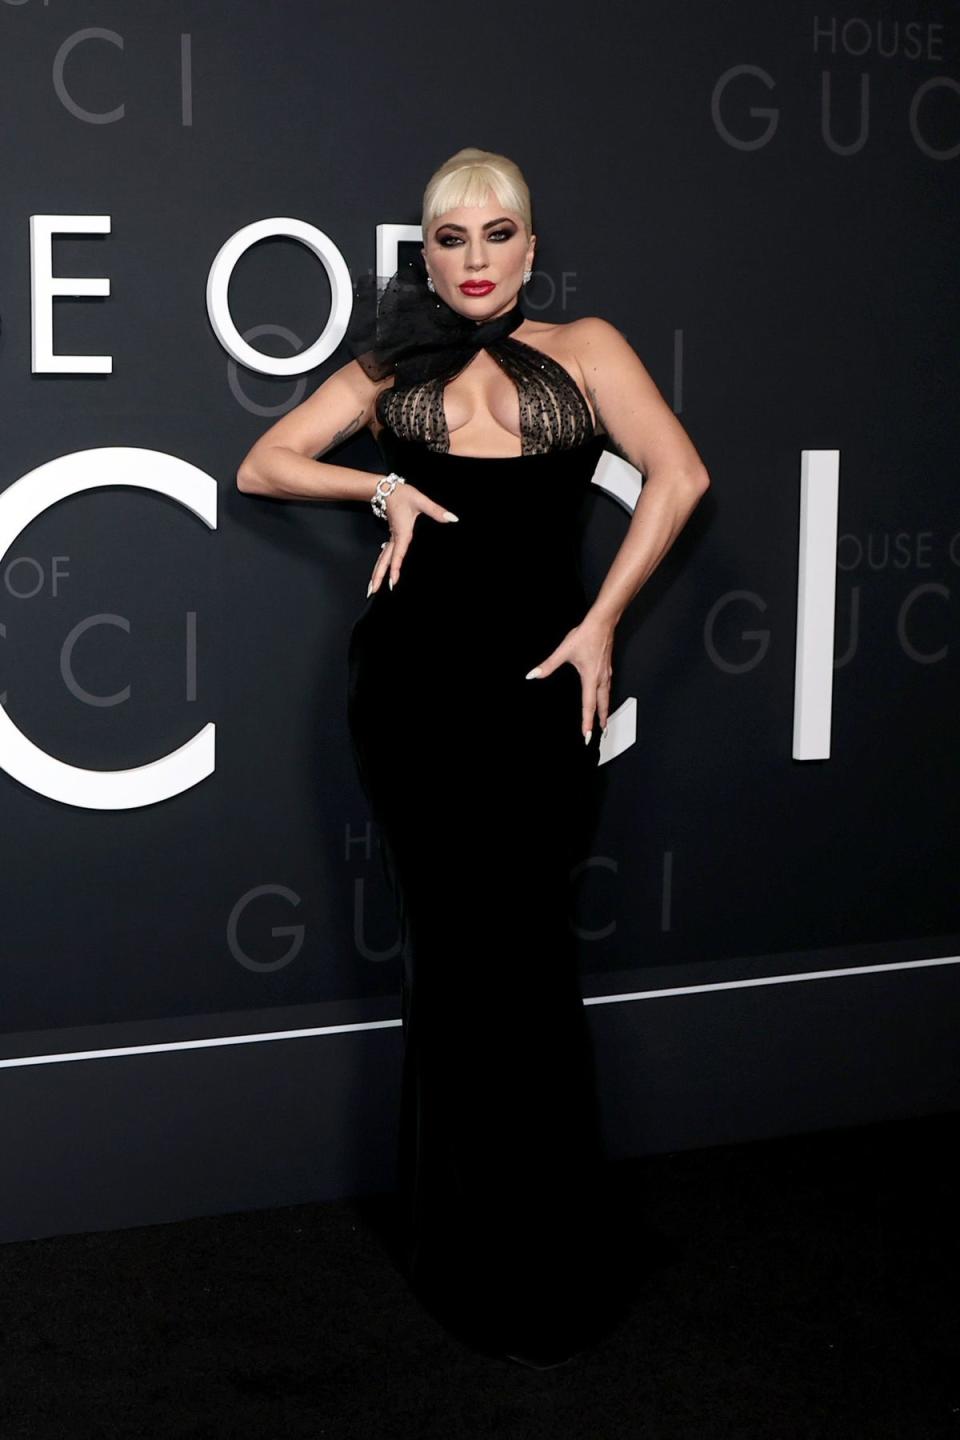 Lady Gaga at the New York premiere of ‘House of Gucci’ wearing Armani Privé (Getty Images)